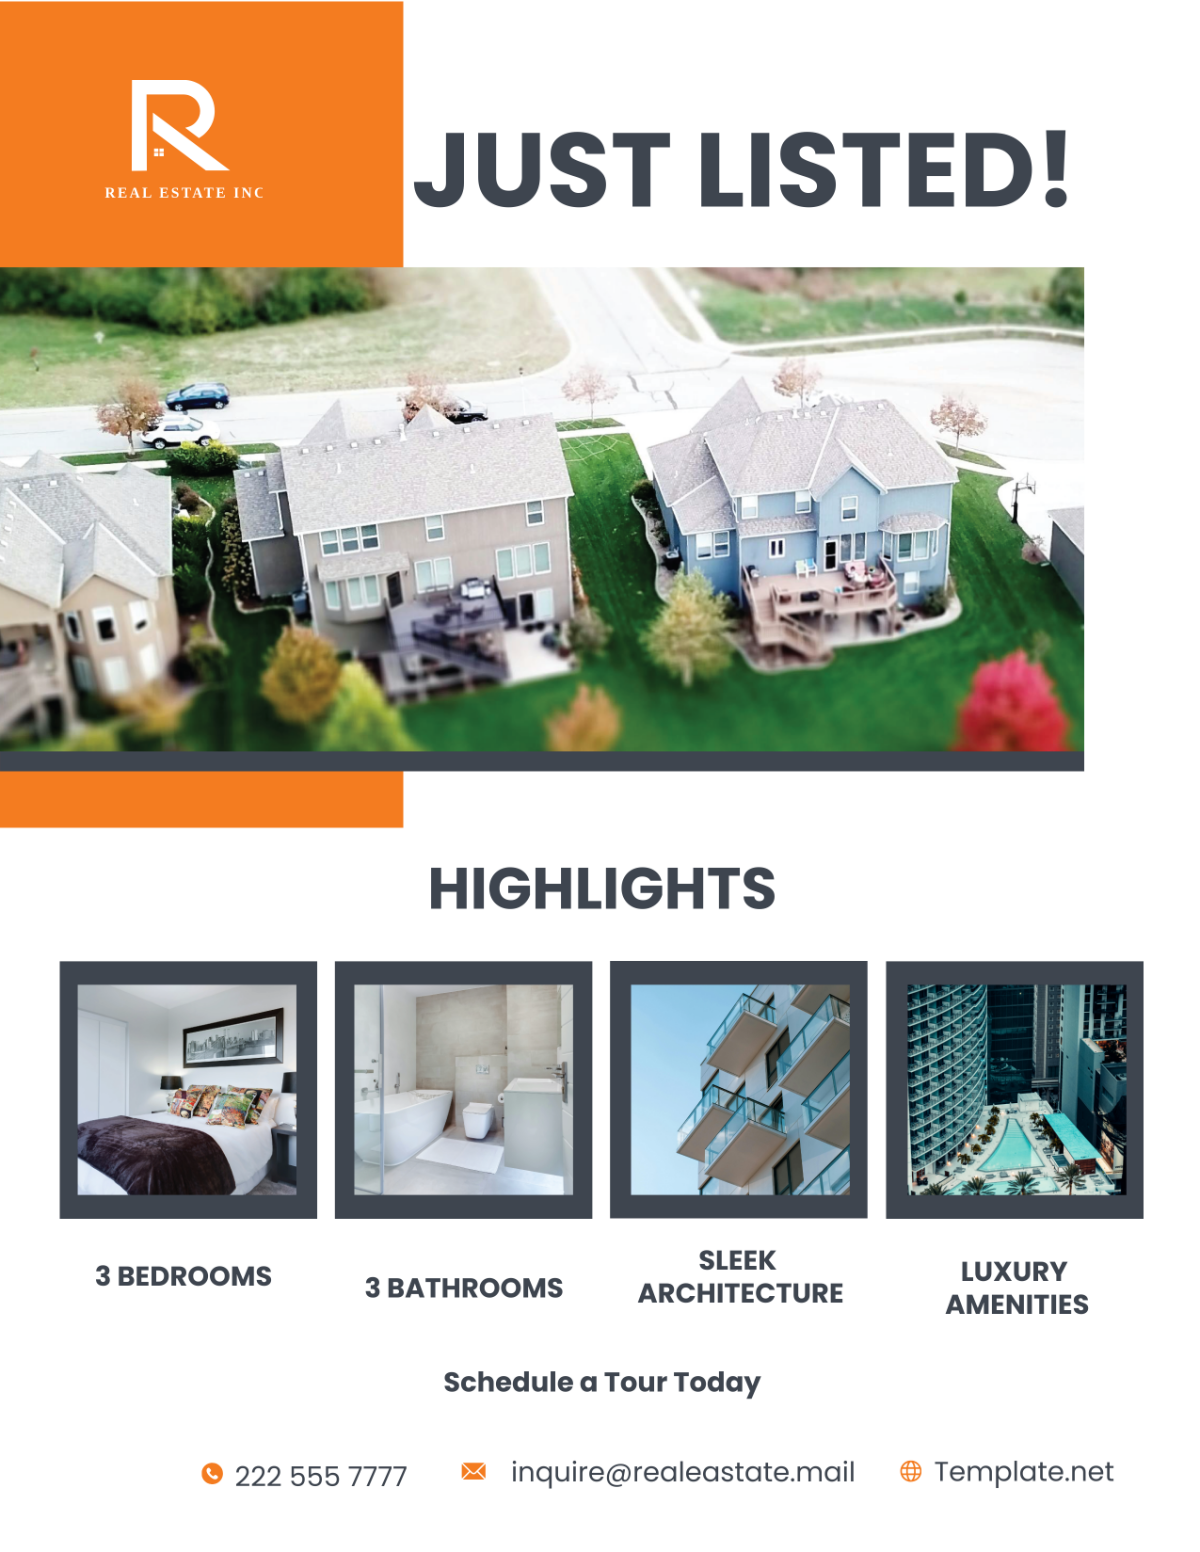 Free Just Listed Property Flyer Template